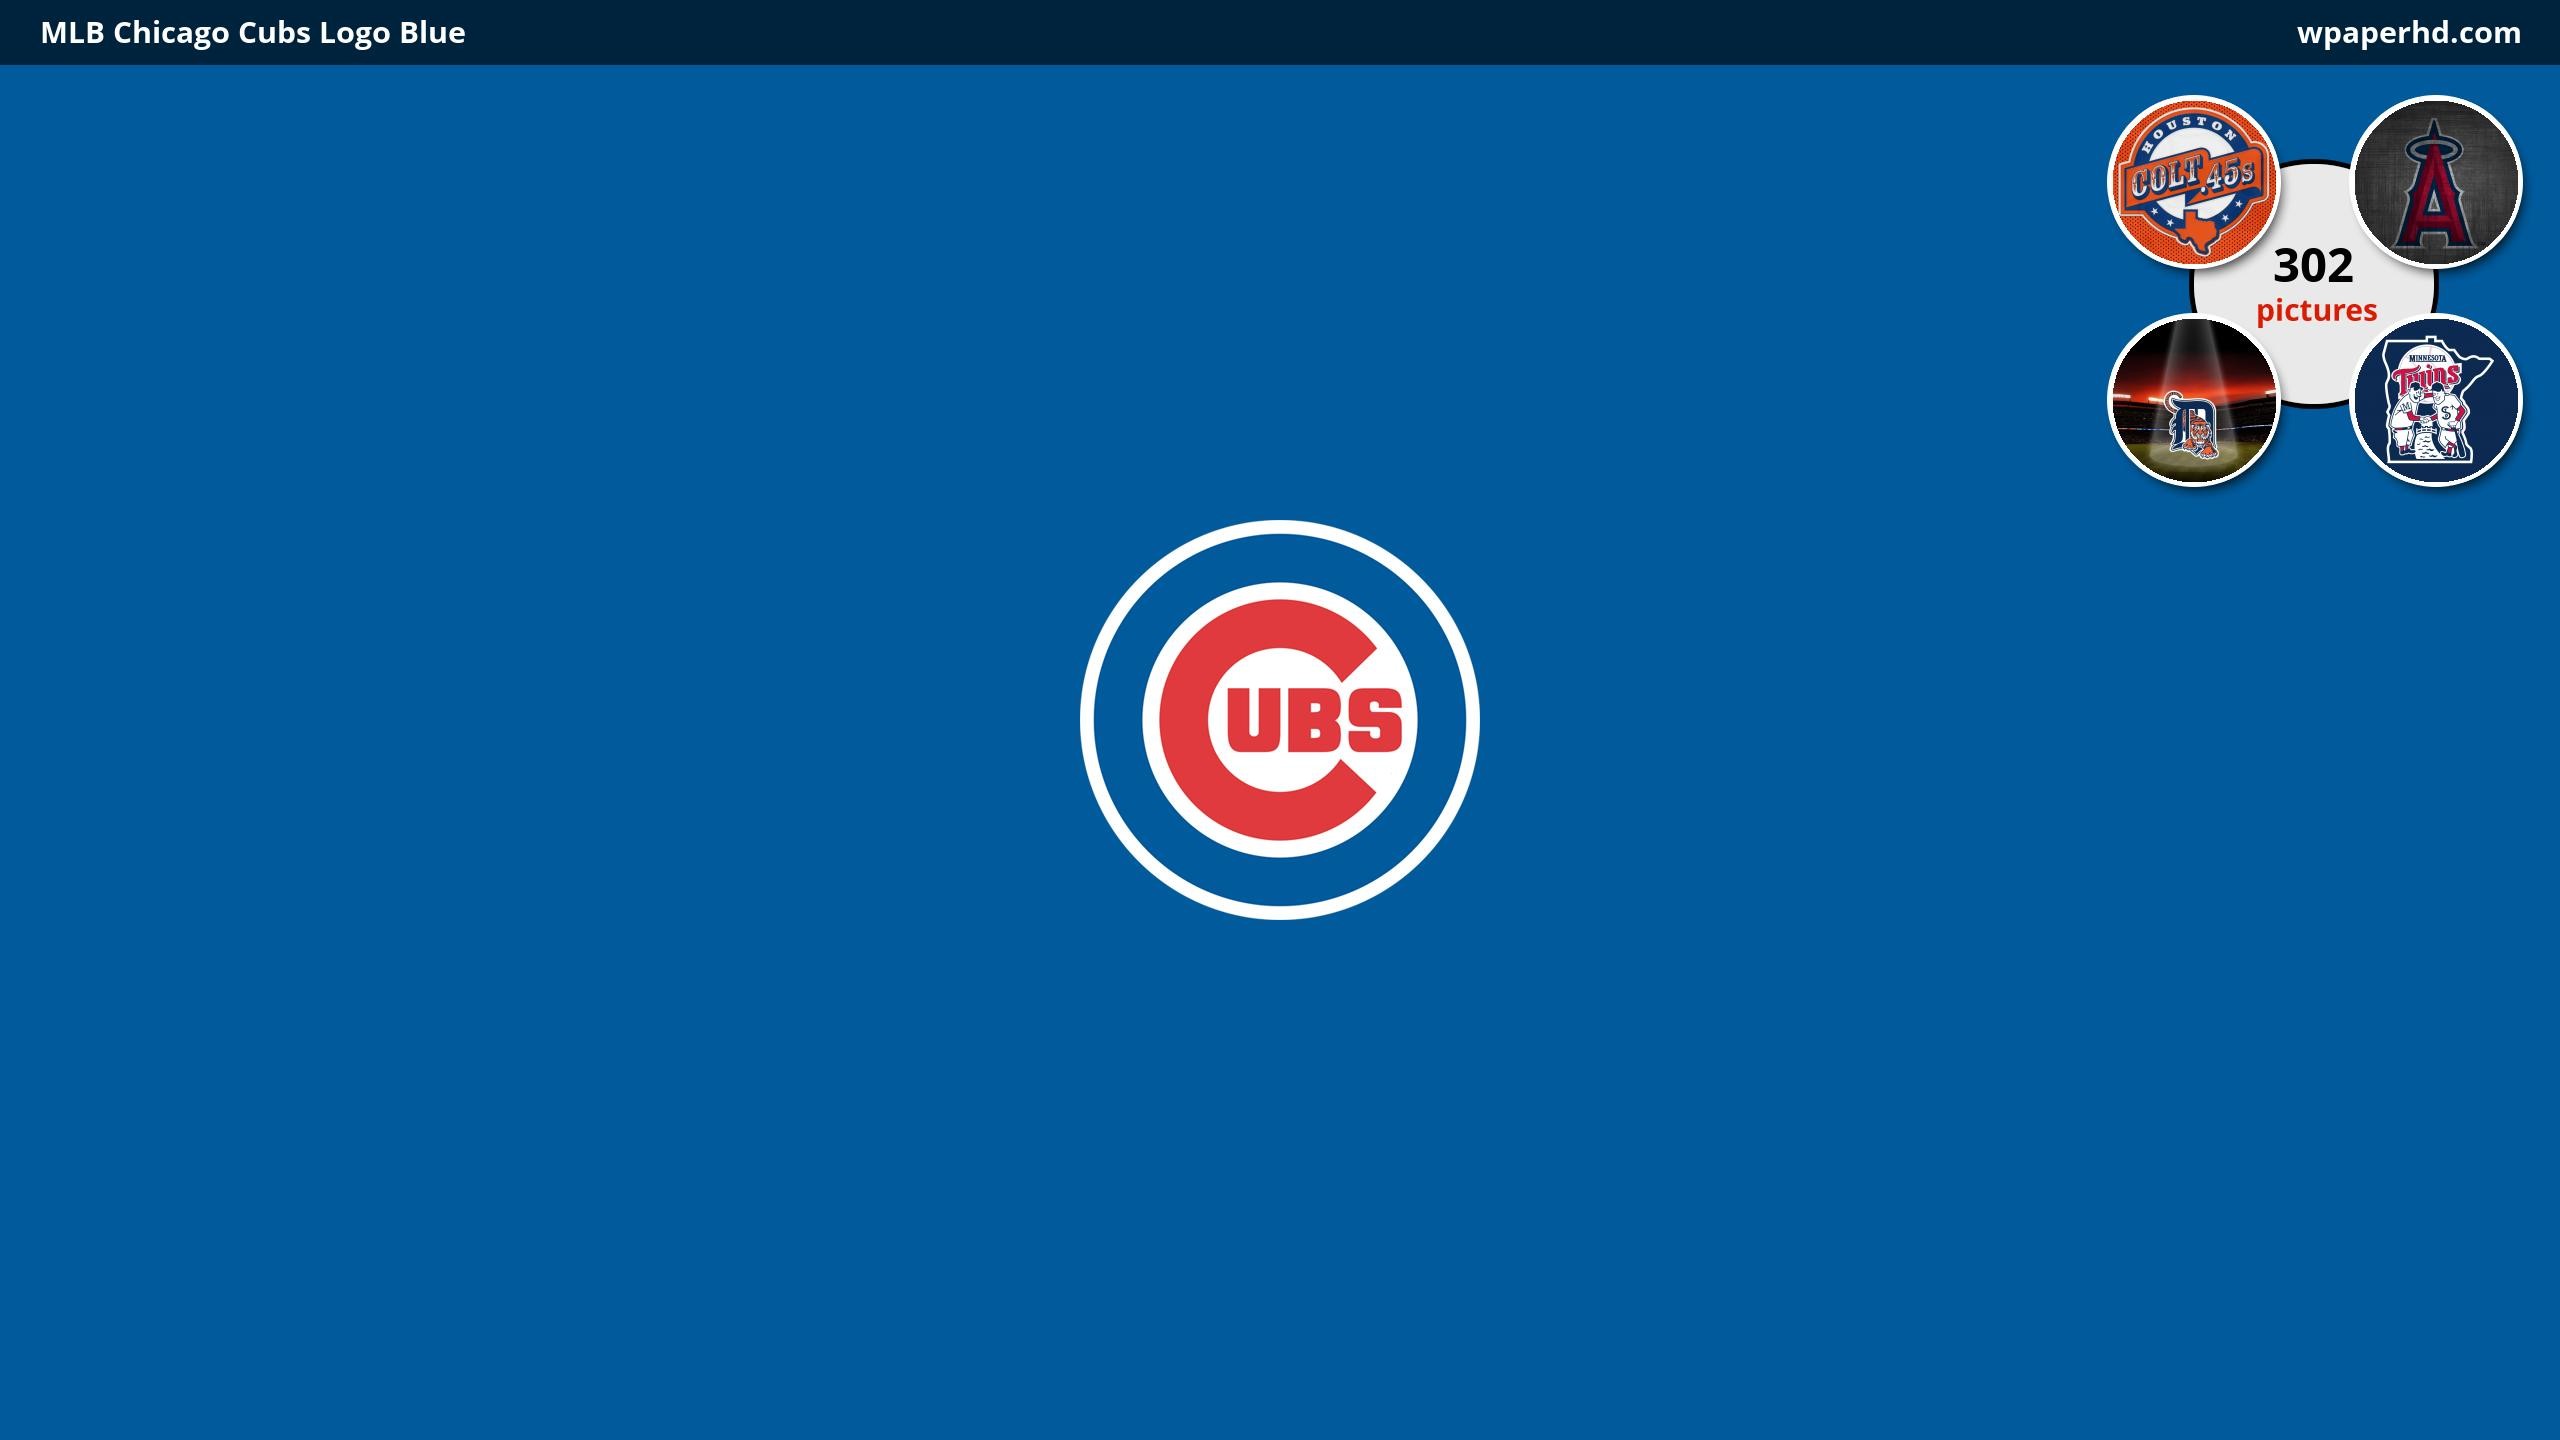 2560x1440 ... Chicago Cubs Logo Blue wallpaper, where you can download this picture  in Original size and ...